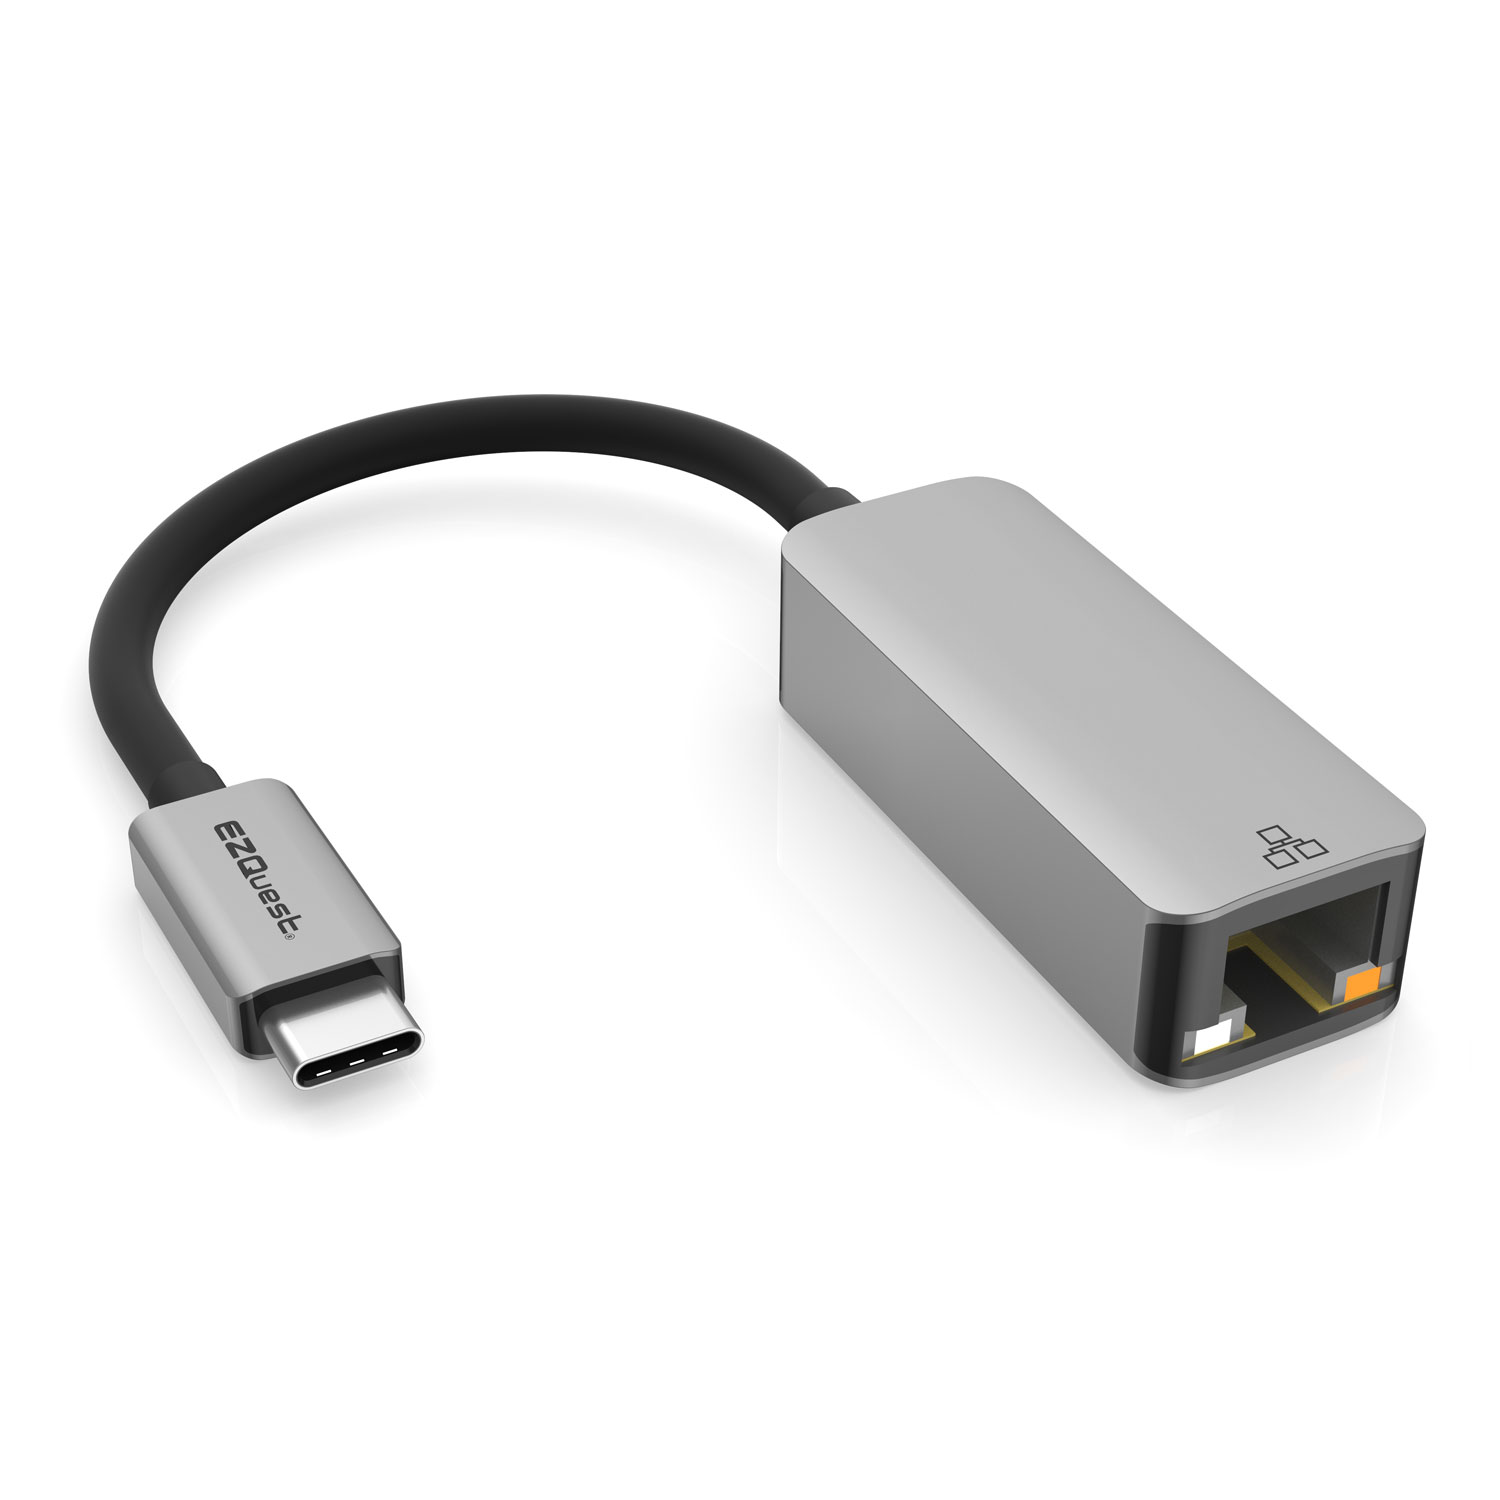 Itramax USB C Gigabit Ethernet Adapter with Charging Port